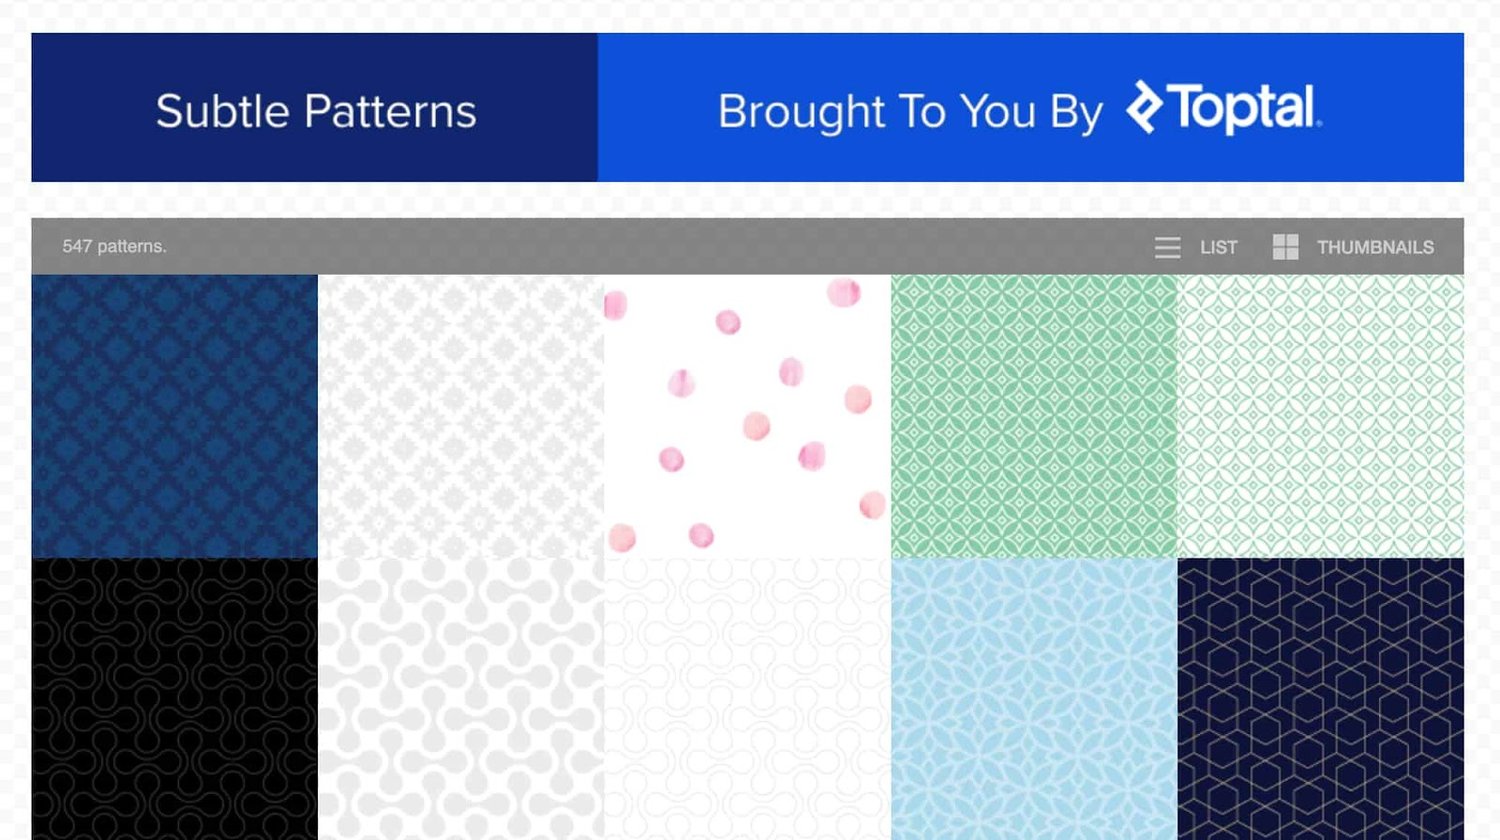 homepage for the web textures resource Subtle Patterns